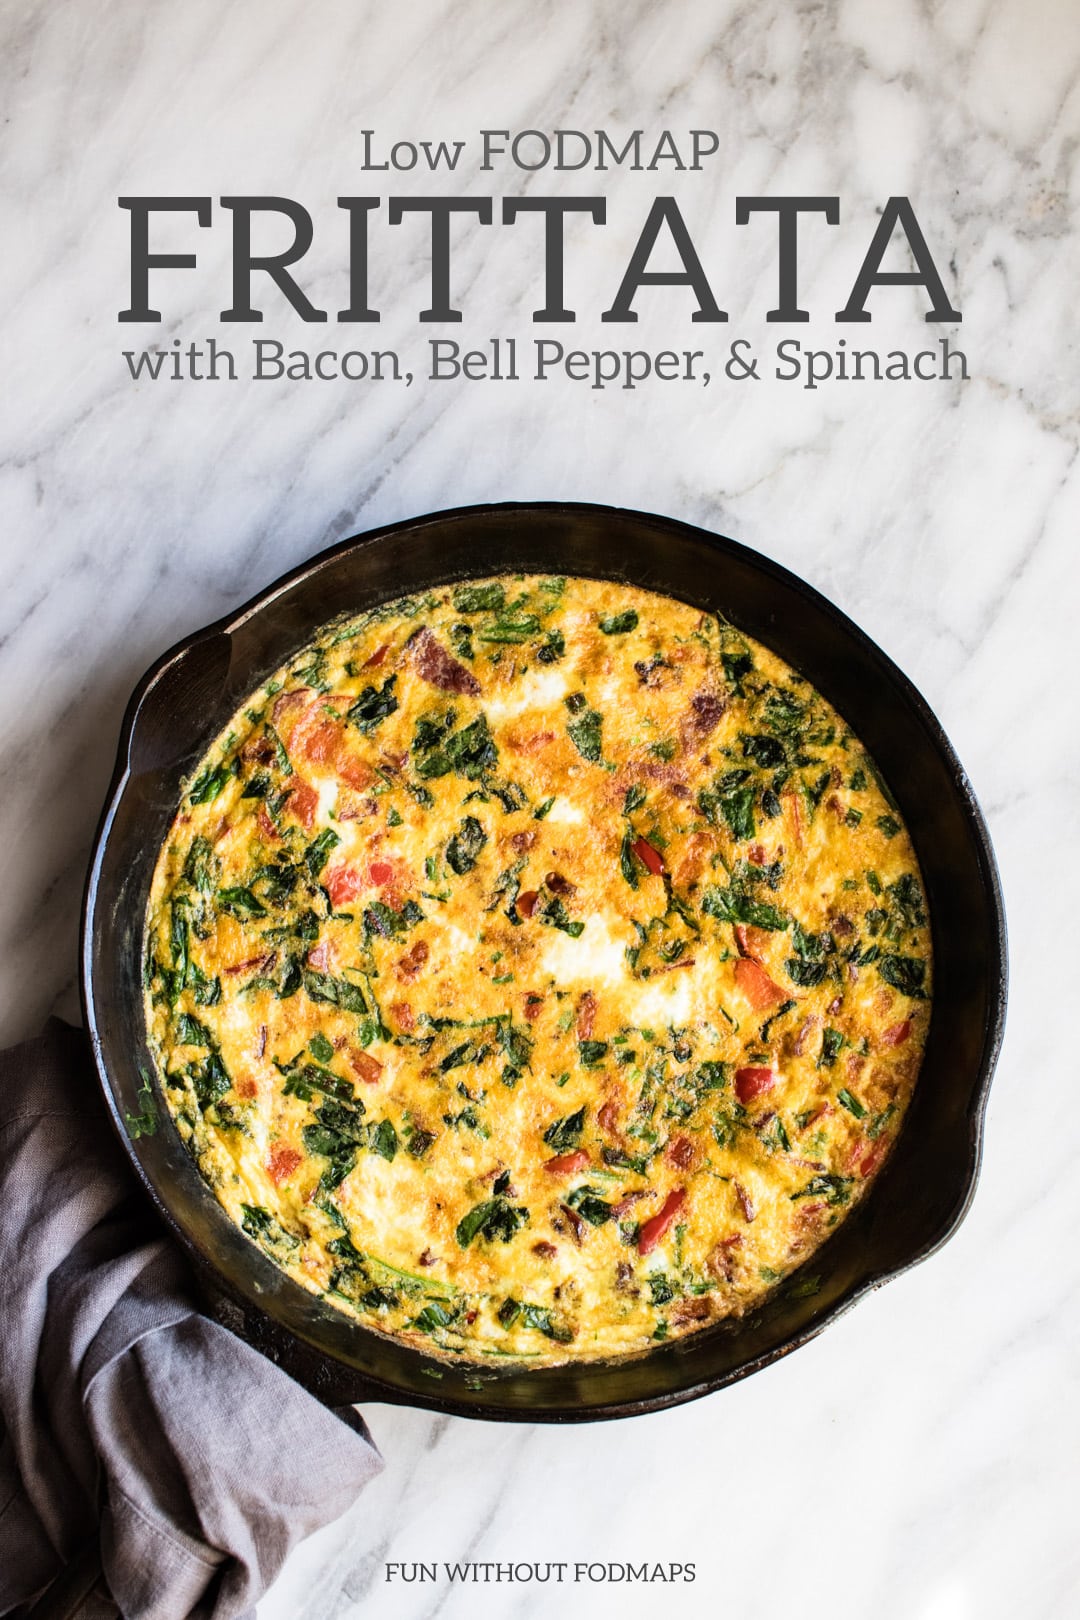 A cast iron skillet filled with frittata sits on a white marble background. Dark gray text reads "Low FODMAP Frittata with Bacon, Bell Pepper, & Spinach"